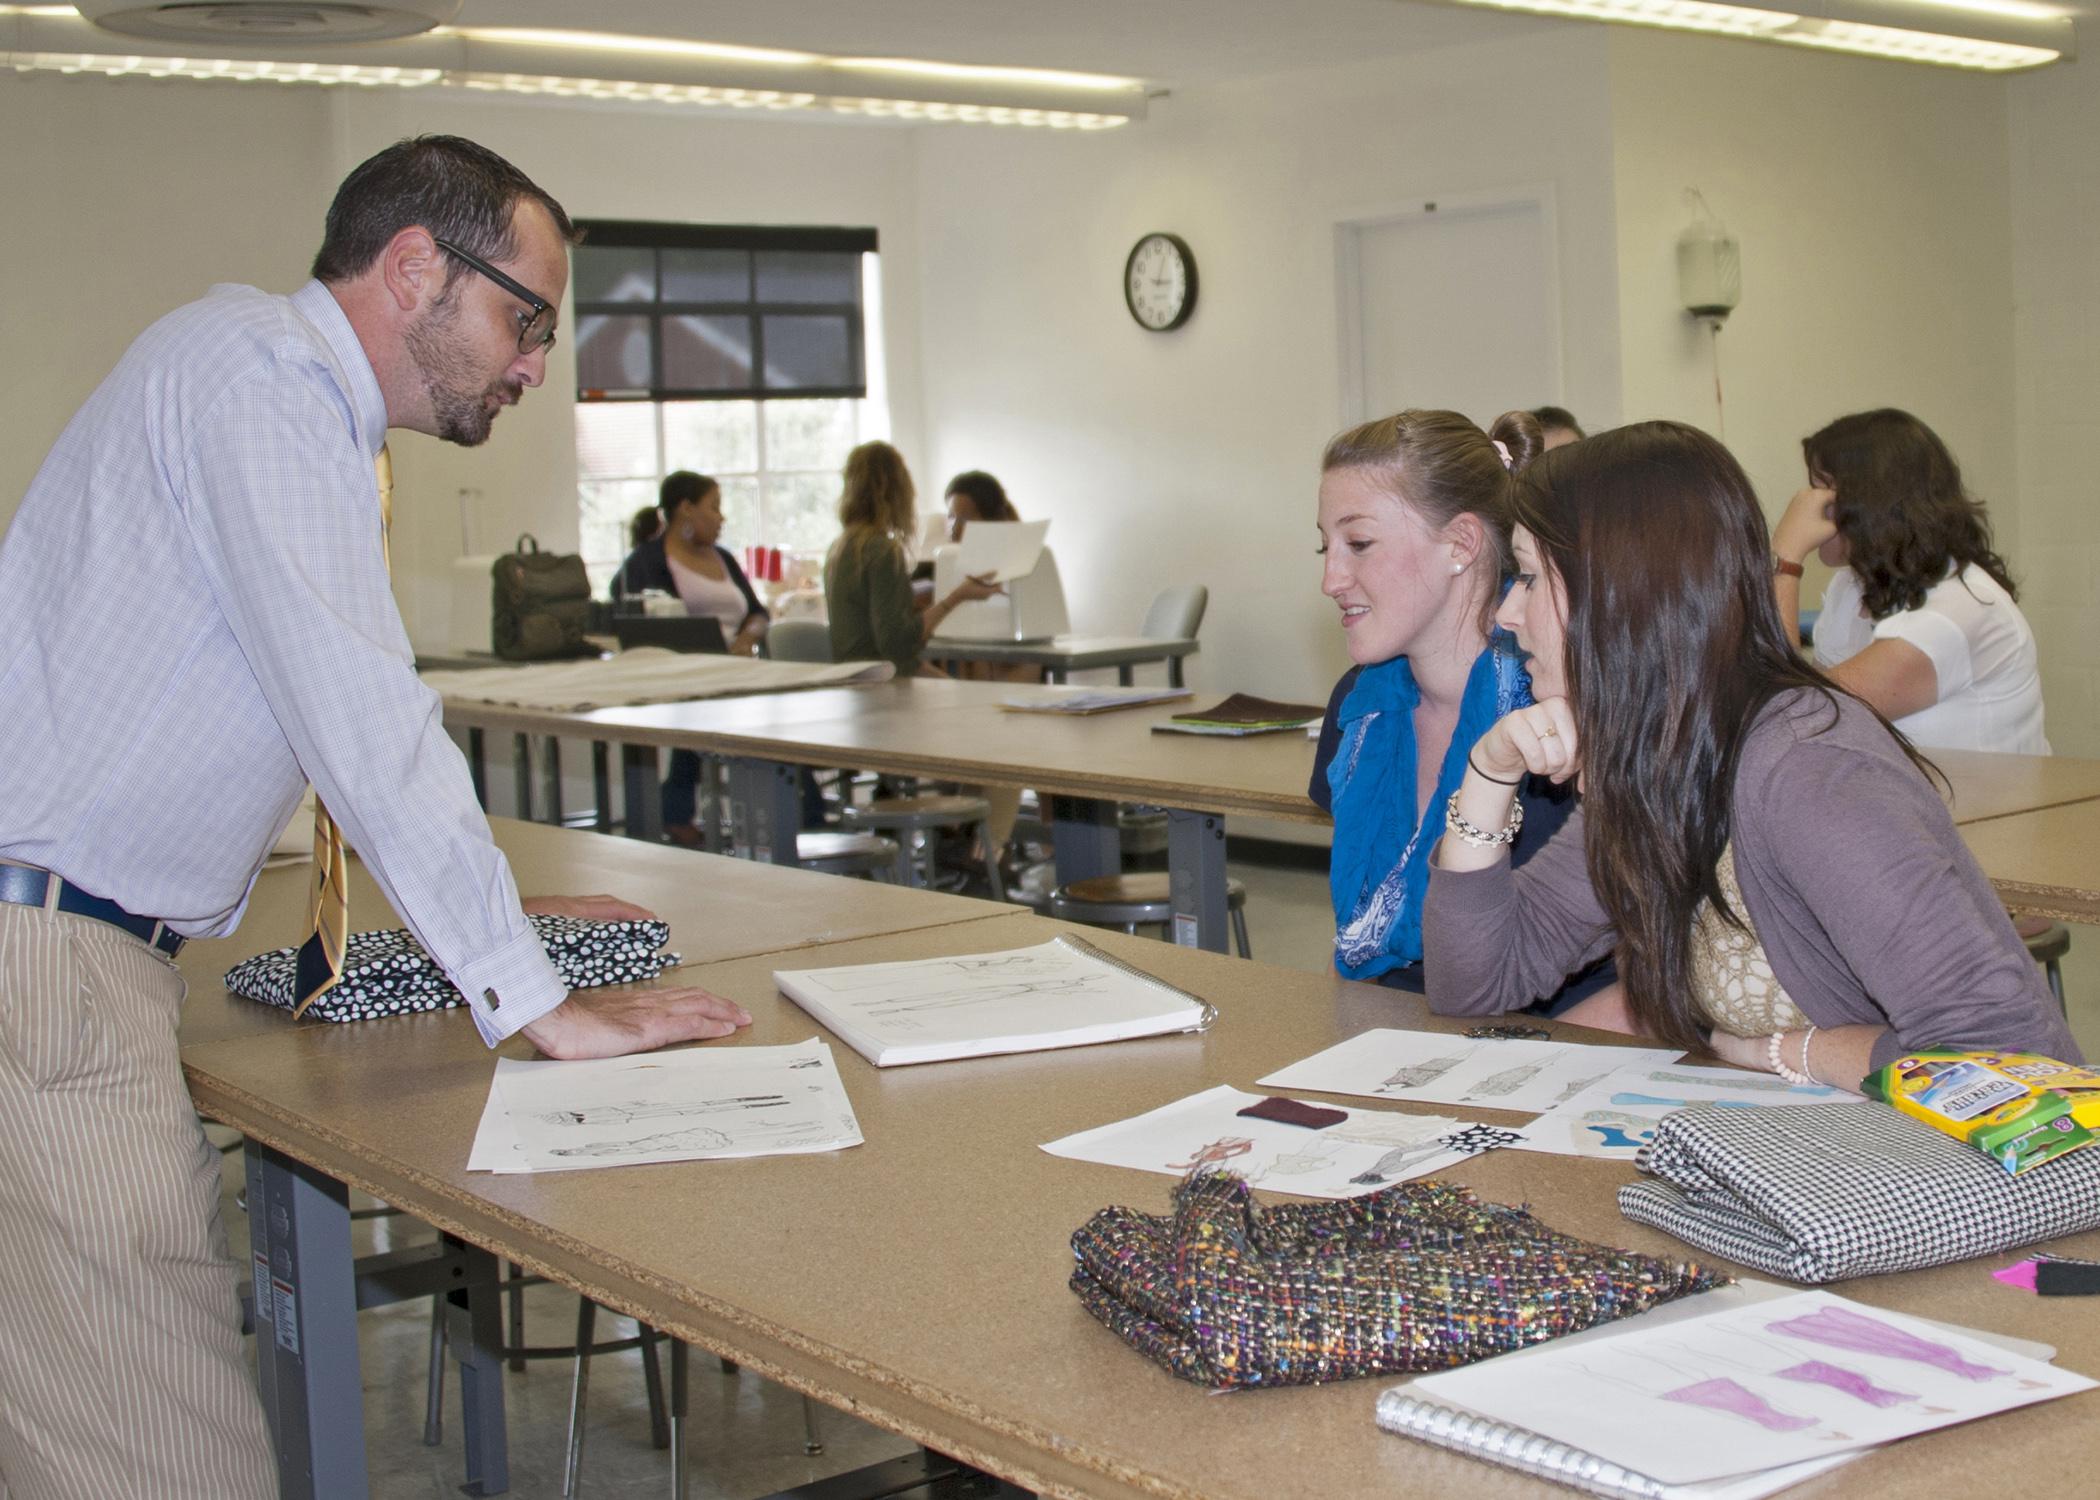 Charles Freeman, assistant professor in the Mississippi State University Apparel, Textiles and Merchandising program, looks at a sketch of a garment with Sarah Ashley Bealor, left, a senior from Tampa, and Rachel Buchanan, a senior from Pontotoc. (Photo by MSU Ag Communications/Kat Lawrence)